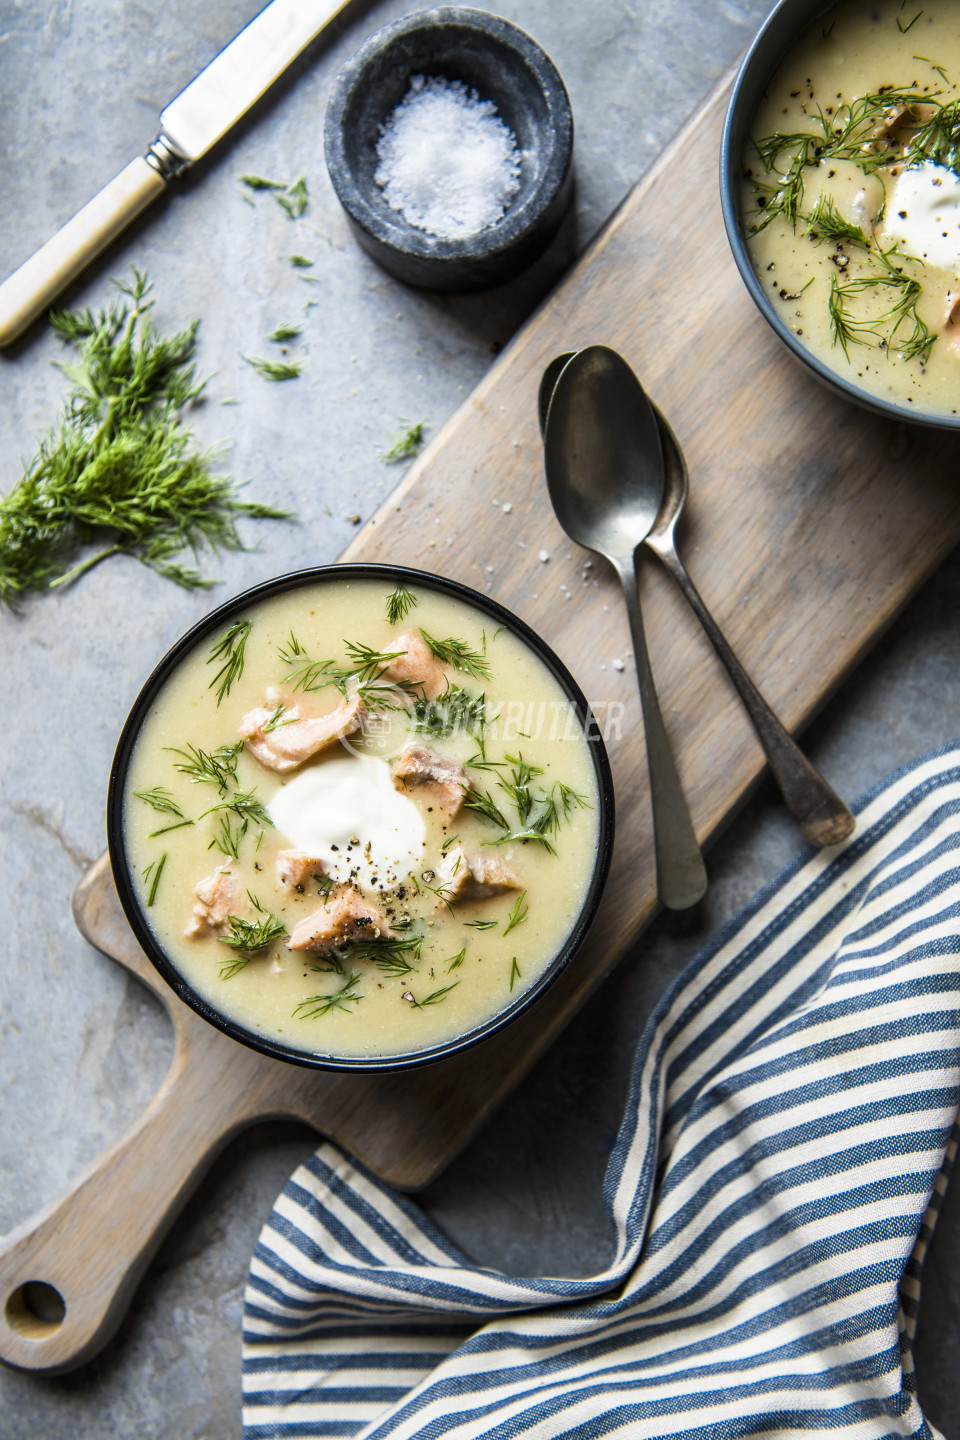 Lohikeitto (Finnish salmon and potato soup) with dill and sour cream | preview